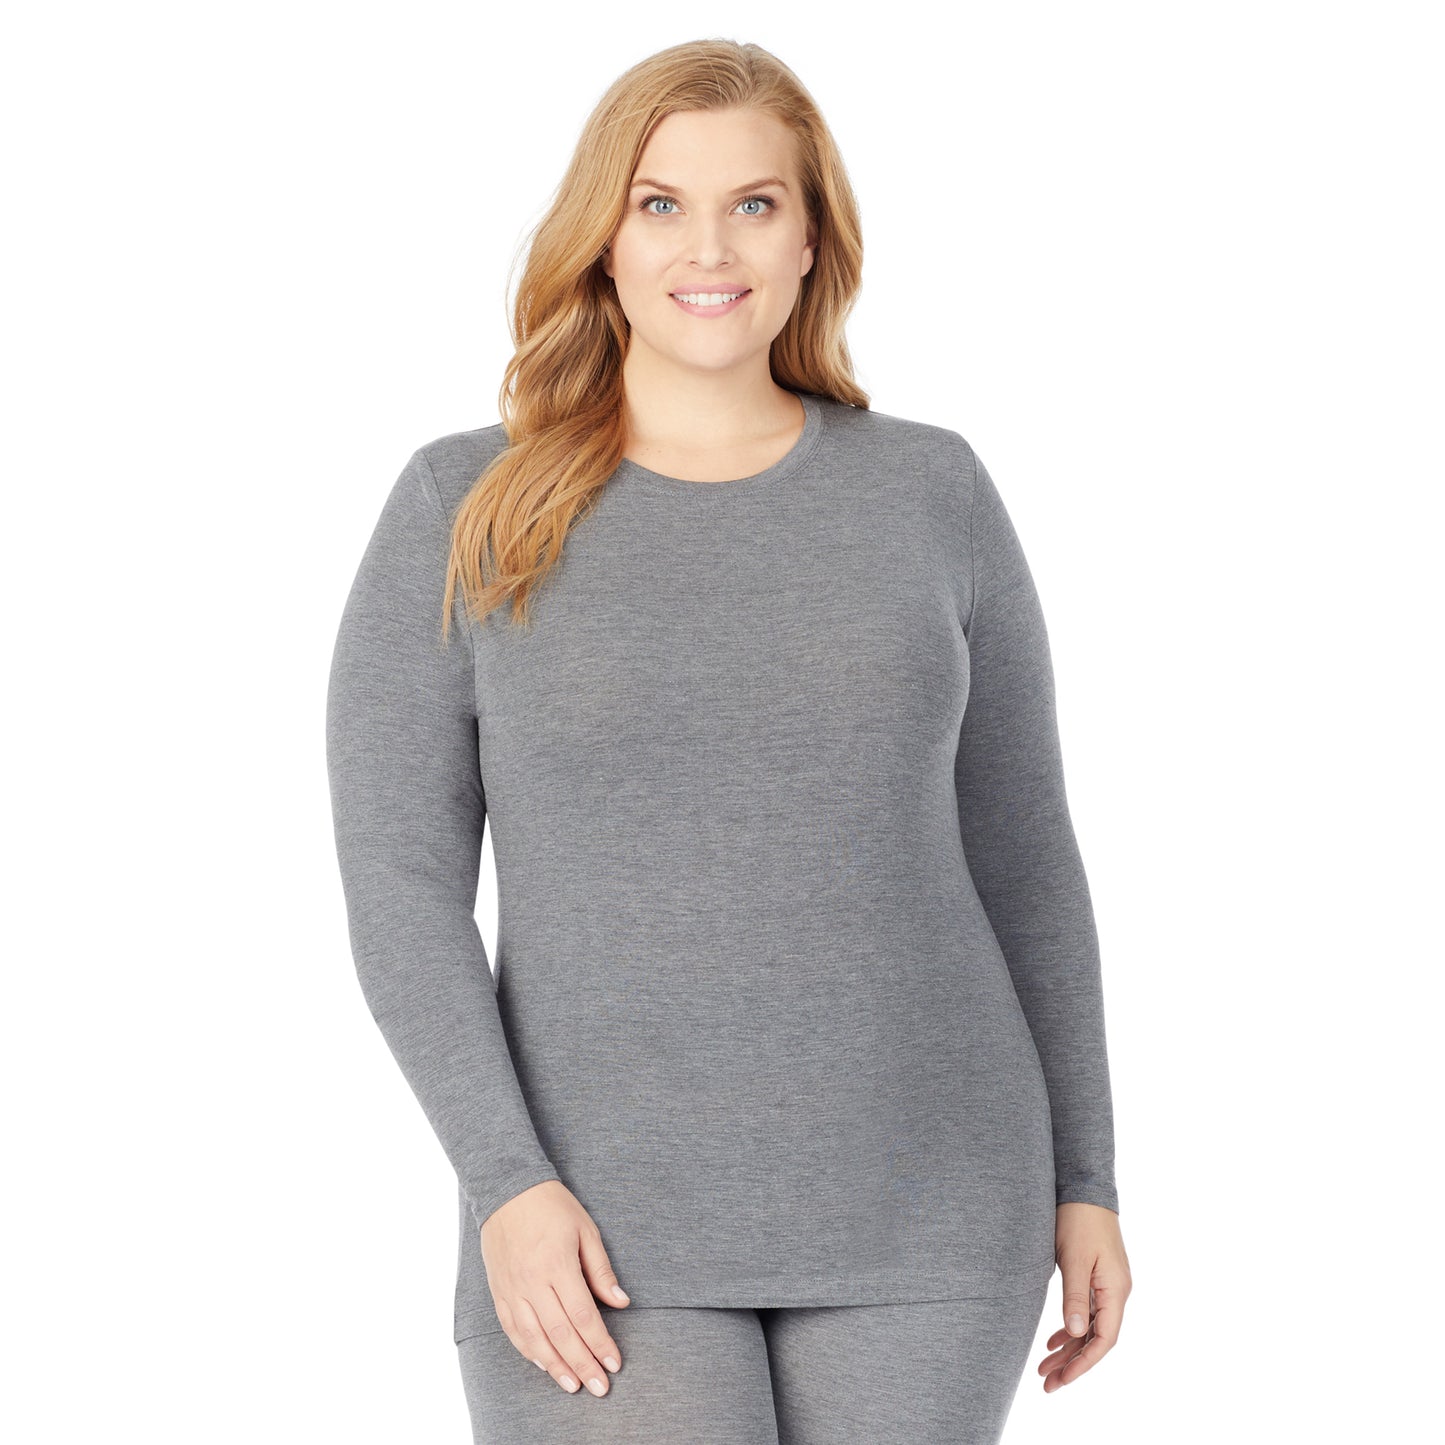 Charcoal Heather; Model is wearing size 1X. She is 5'9", Bust 38", Waist 36", Hips 48.5". @A lady wearing a charcoal heather long sleeve stretch crew plus.